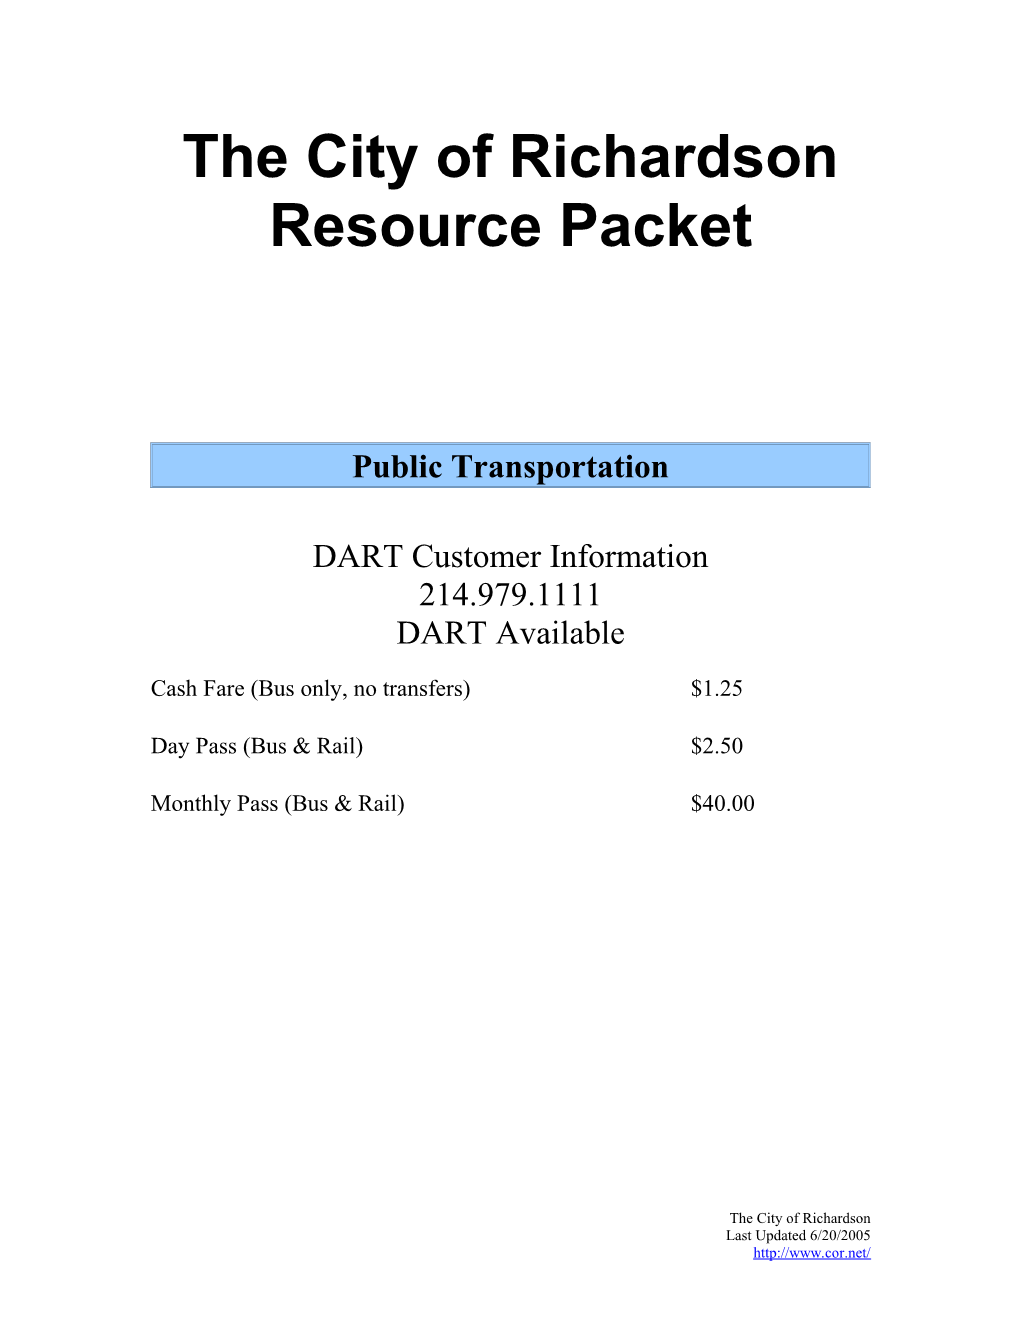 The City of Richardson Resource Packet